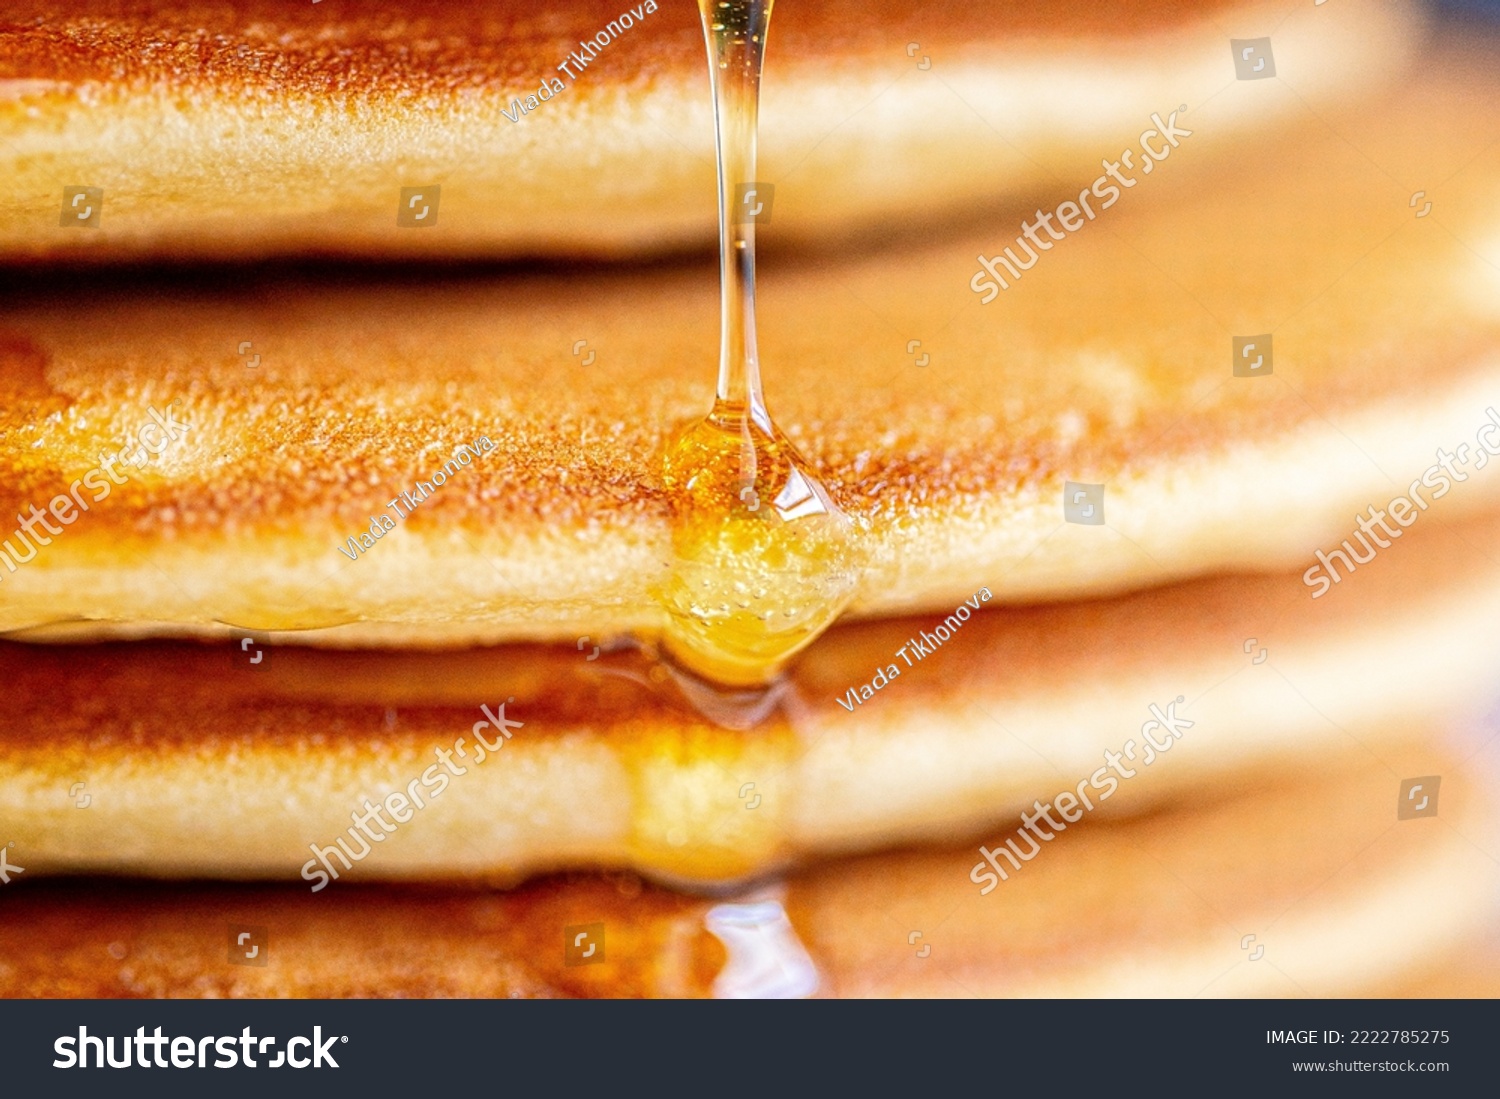 A drop of honey spreads over the pancake.Pancakes with syrup macro shot.Syrup pours on a pancake macro photo.Honey spreads.Drop of syrup close-up.Golden pancakes with glitter syrup.Delicious sweet  #2222785275